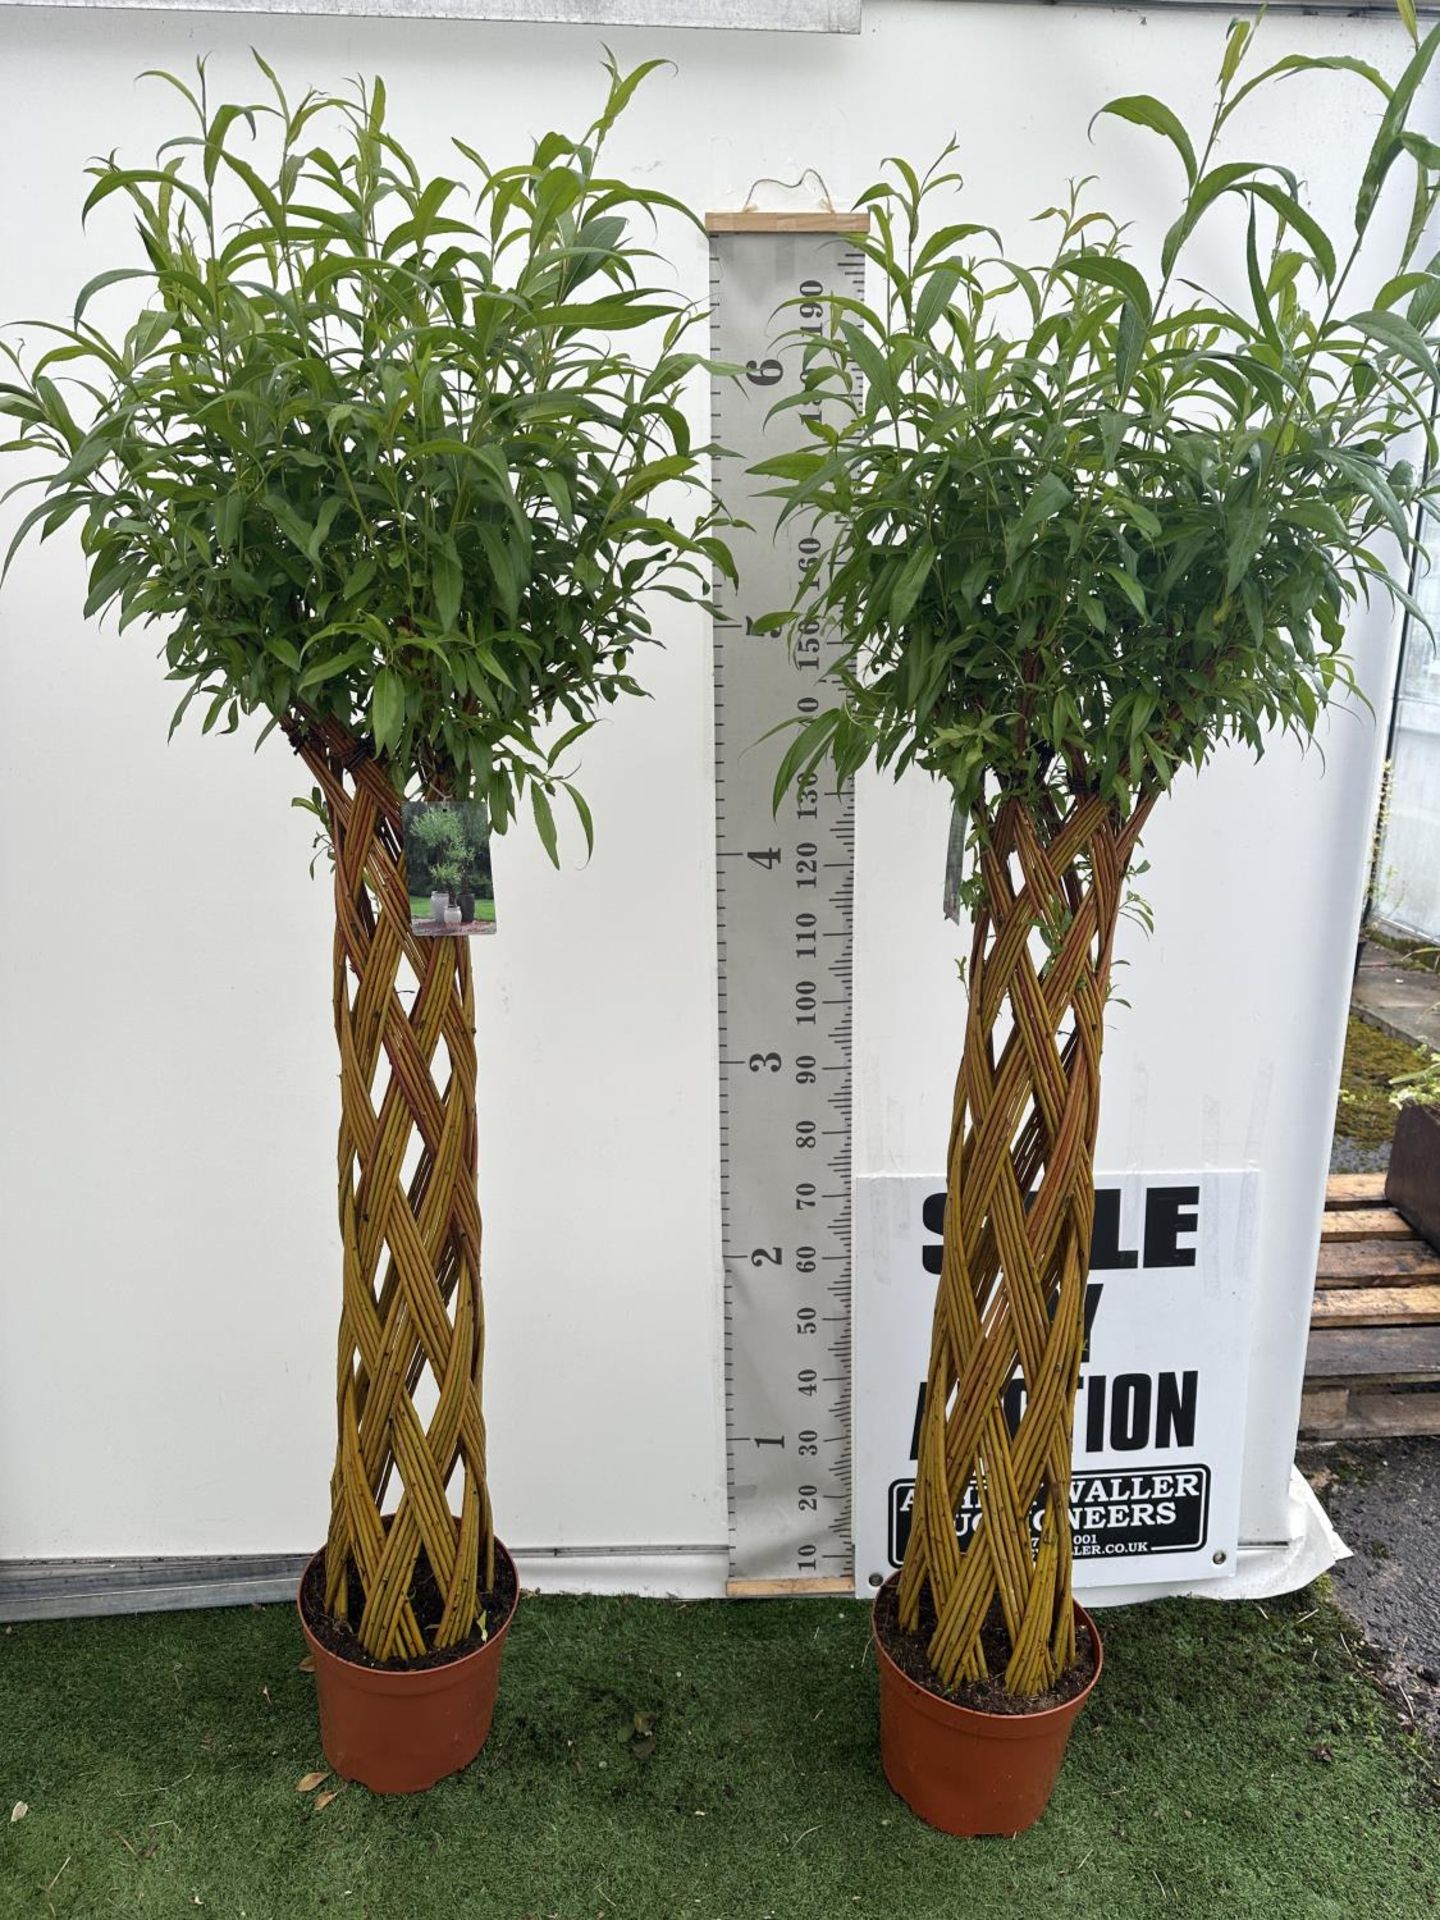 A PAIR OF SALIX LIVING WILLOW EXCLUSIVE IN 7.5 LTR POTS OVER 200 CM TALL TO BE SOLD FOR THE PAIR